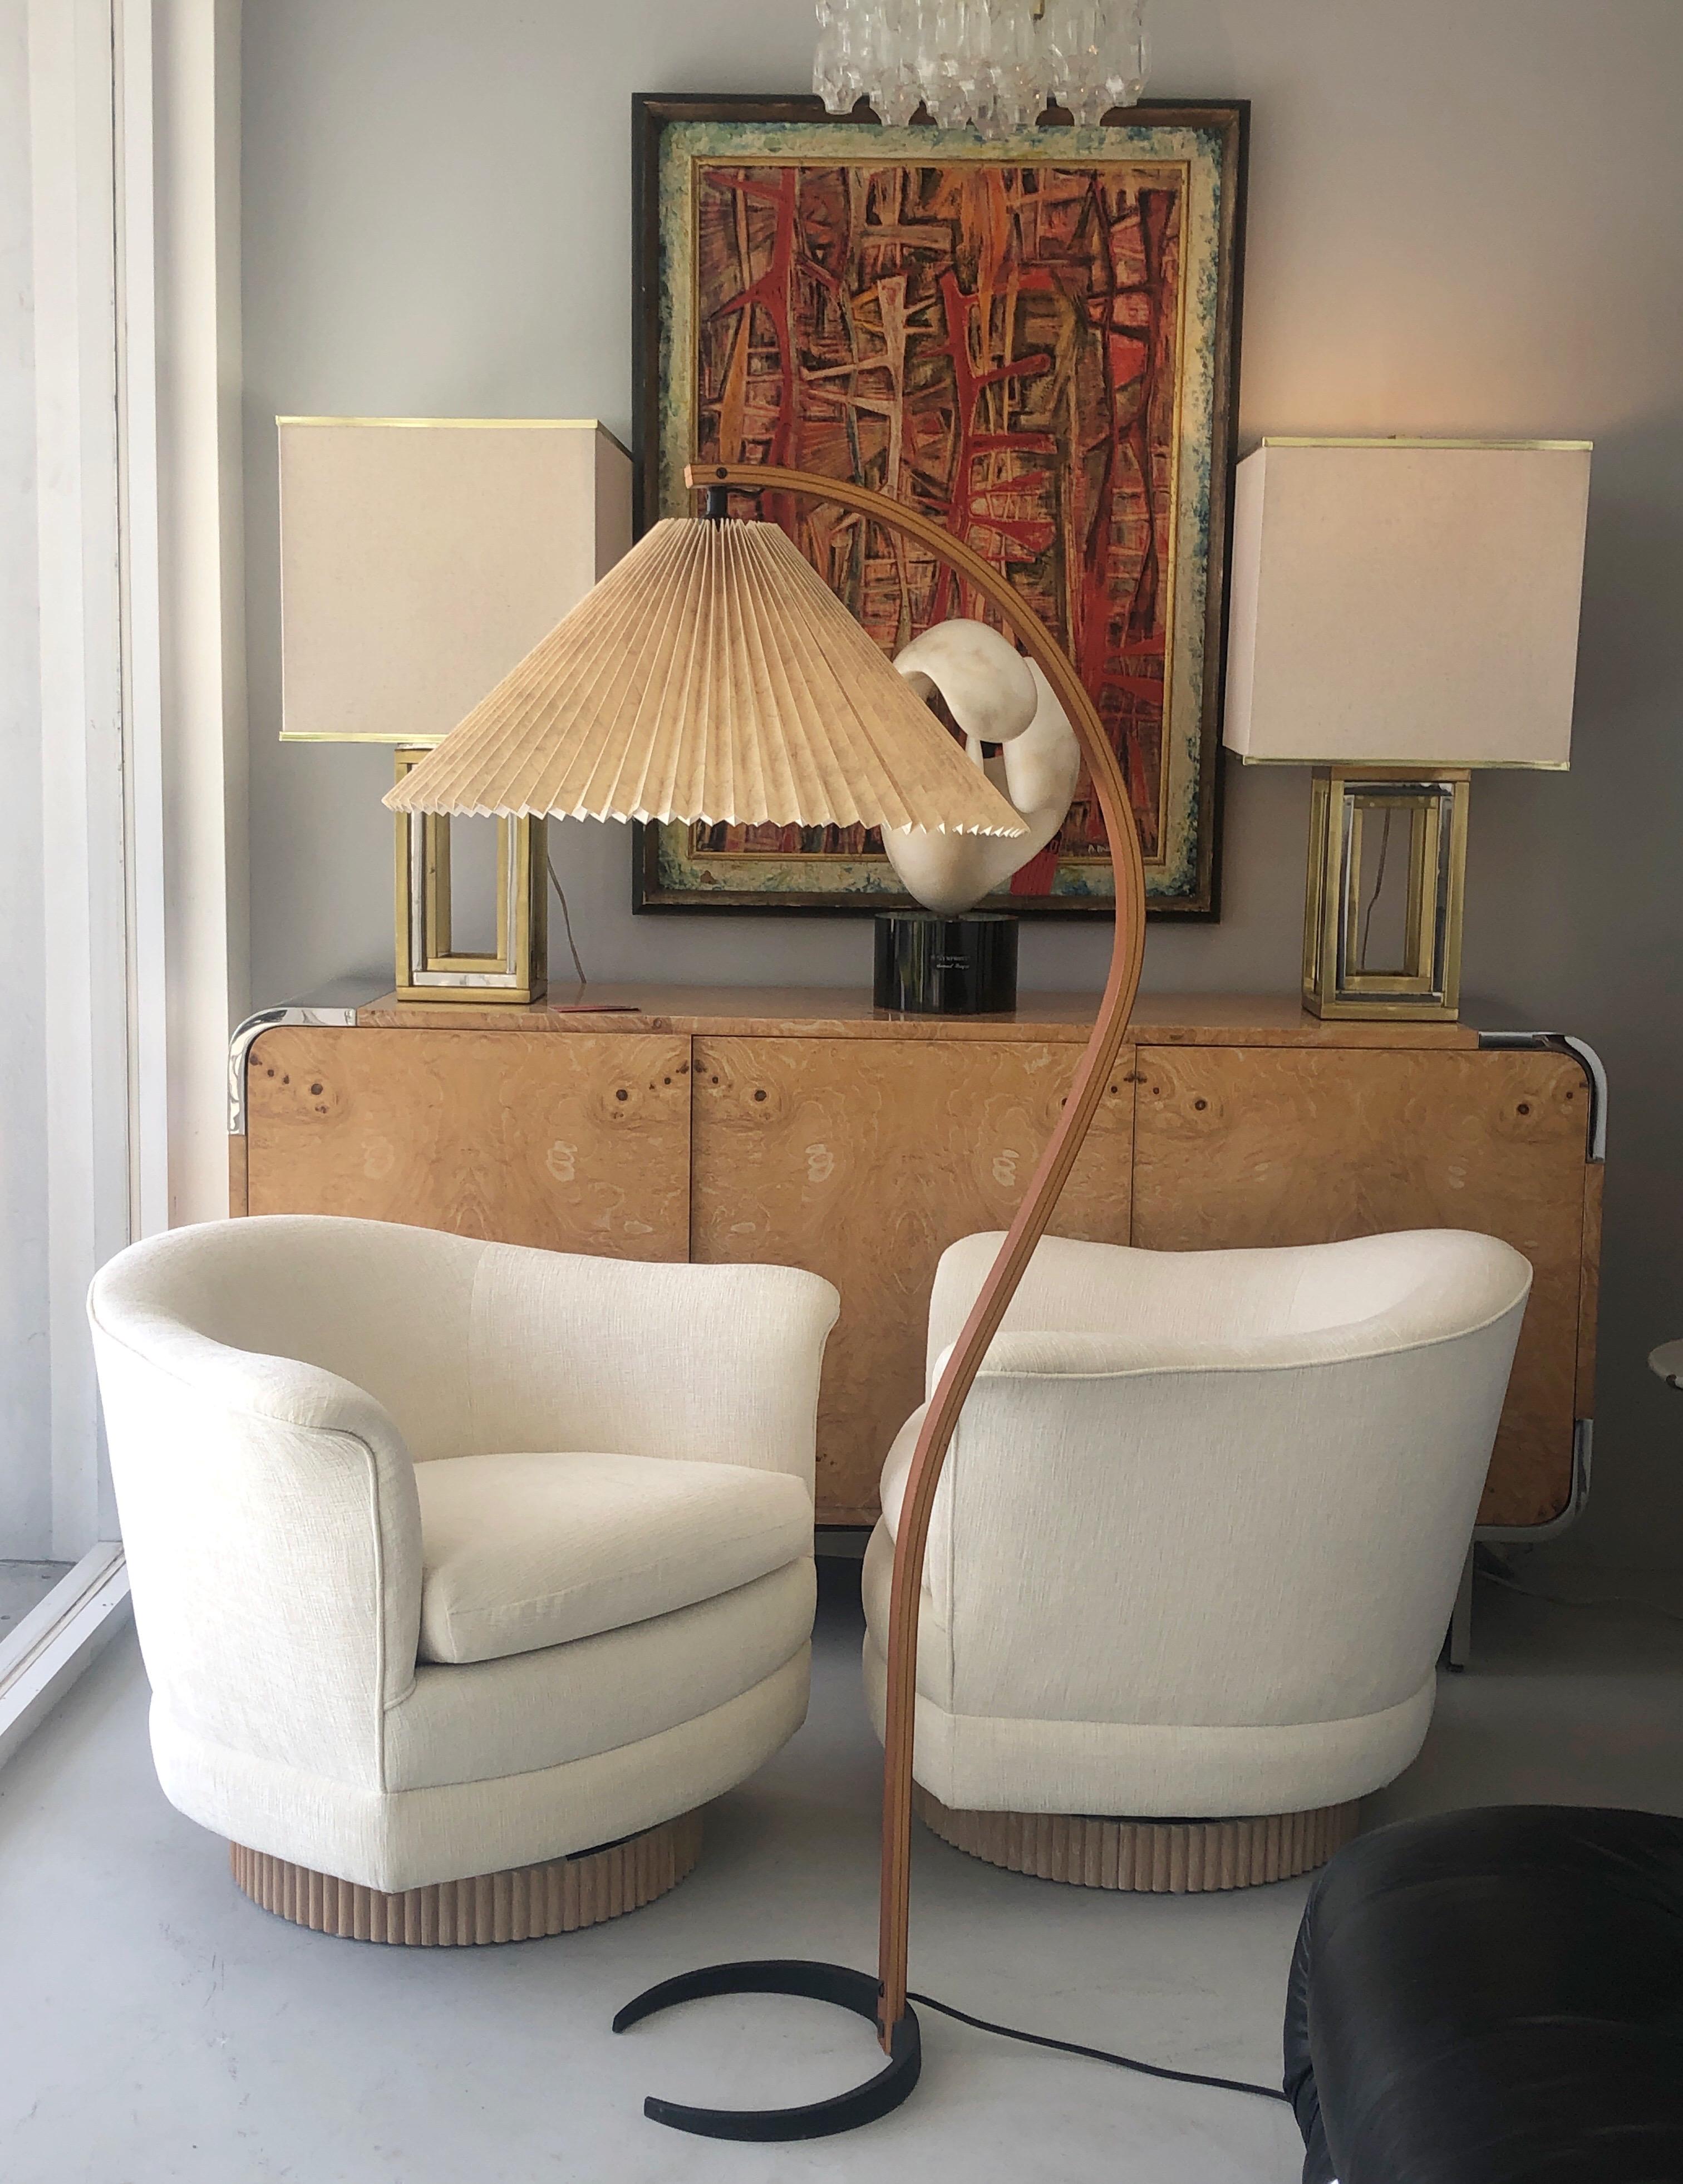 Stylish floor lamp by Mads Caprani Light. Signed on the solid iron crescent shape base. Retains the original pleaded shade.